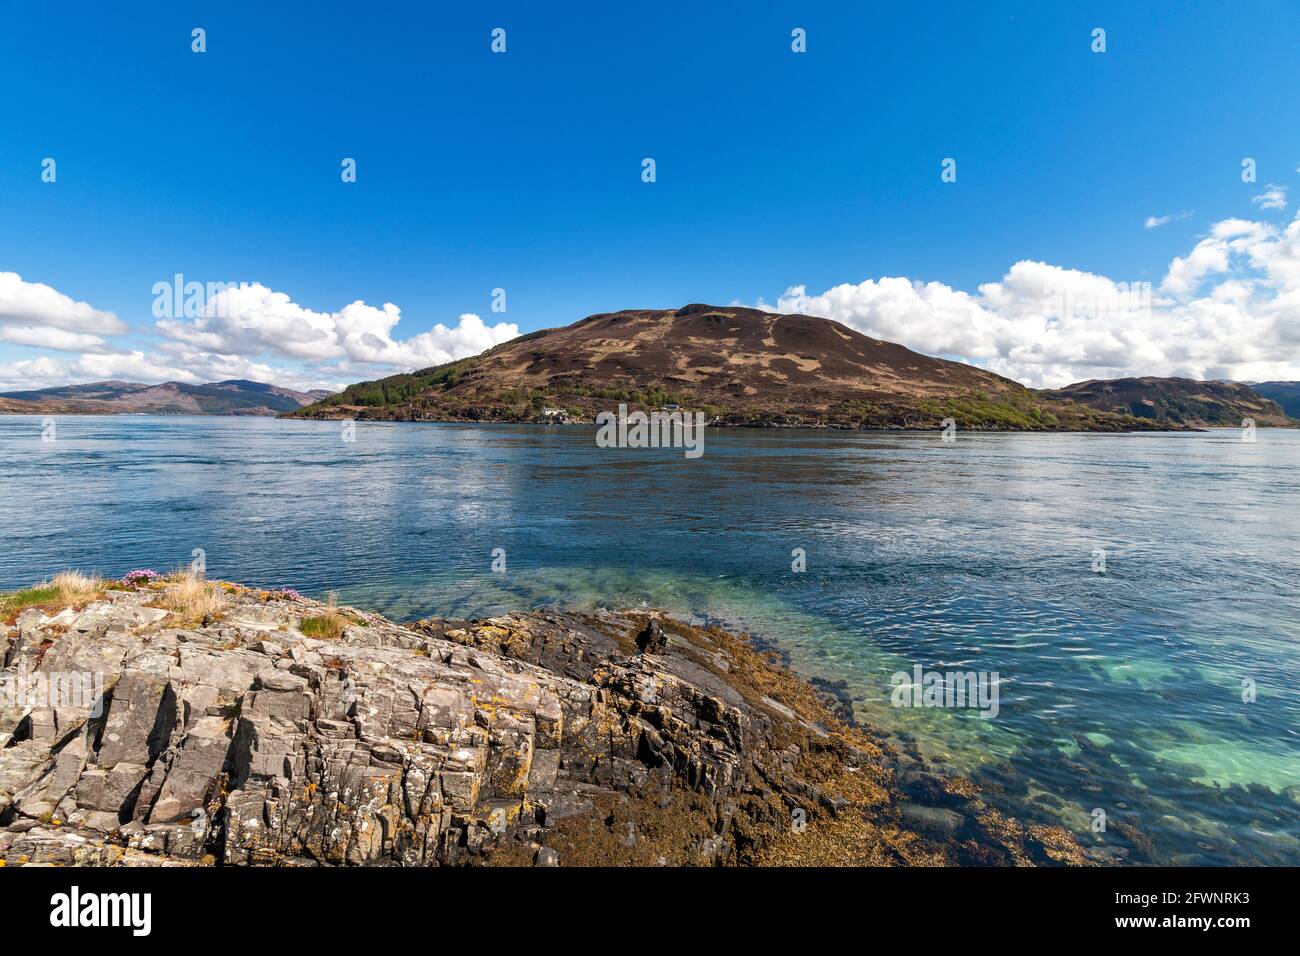 GLENELG HIGHLAND SCOTLAND A VIEW FROM SKYE ACROSS THE LIMPID STRAITS OF KYLE RHEA TOWARDS THE FERRY AND FERRY SLIPWAY ON THE MAINLAND Stock Photo